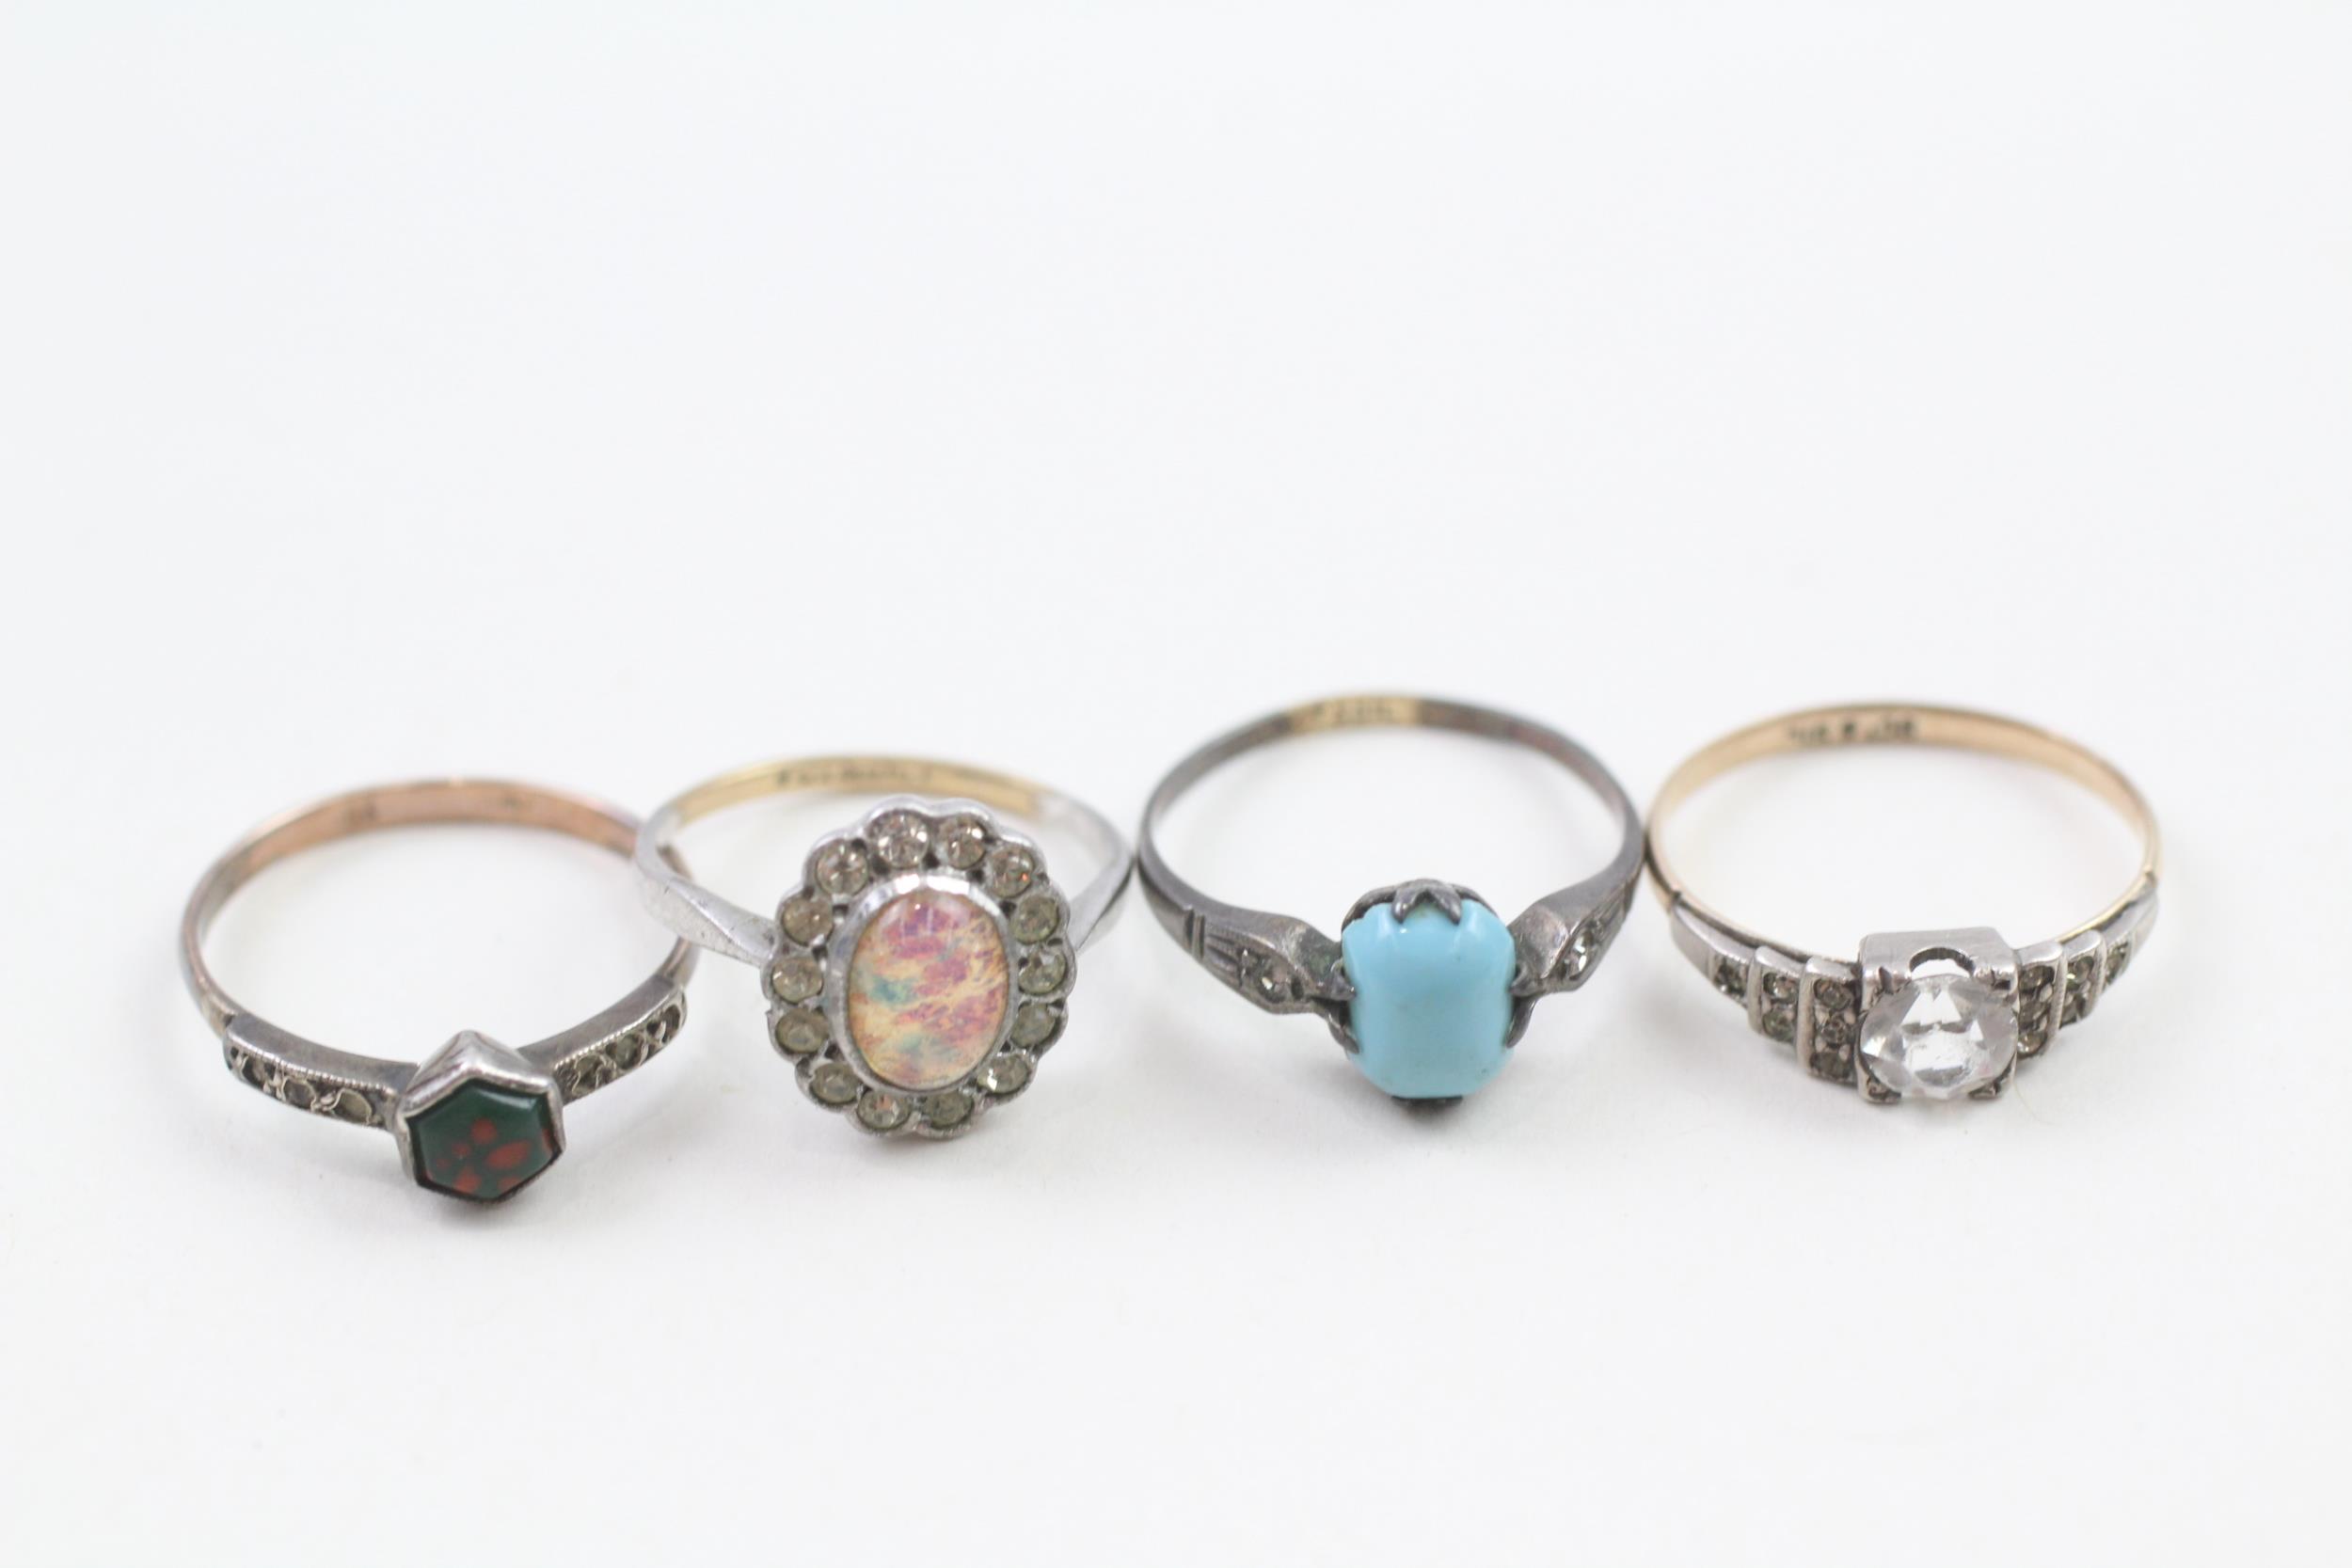 4 x 9ct gold and silver vintage paste, foiled glass and faux gemstone set rings (7g) Size L 1/2 +